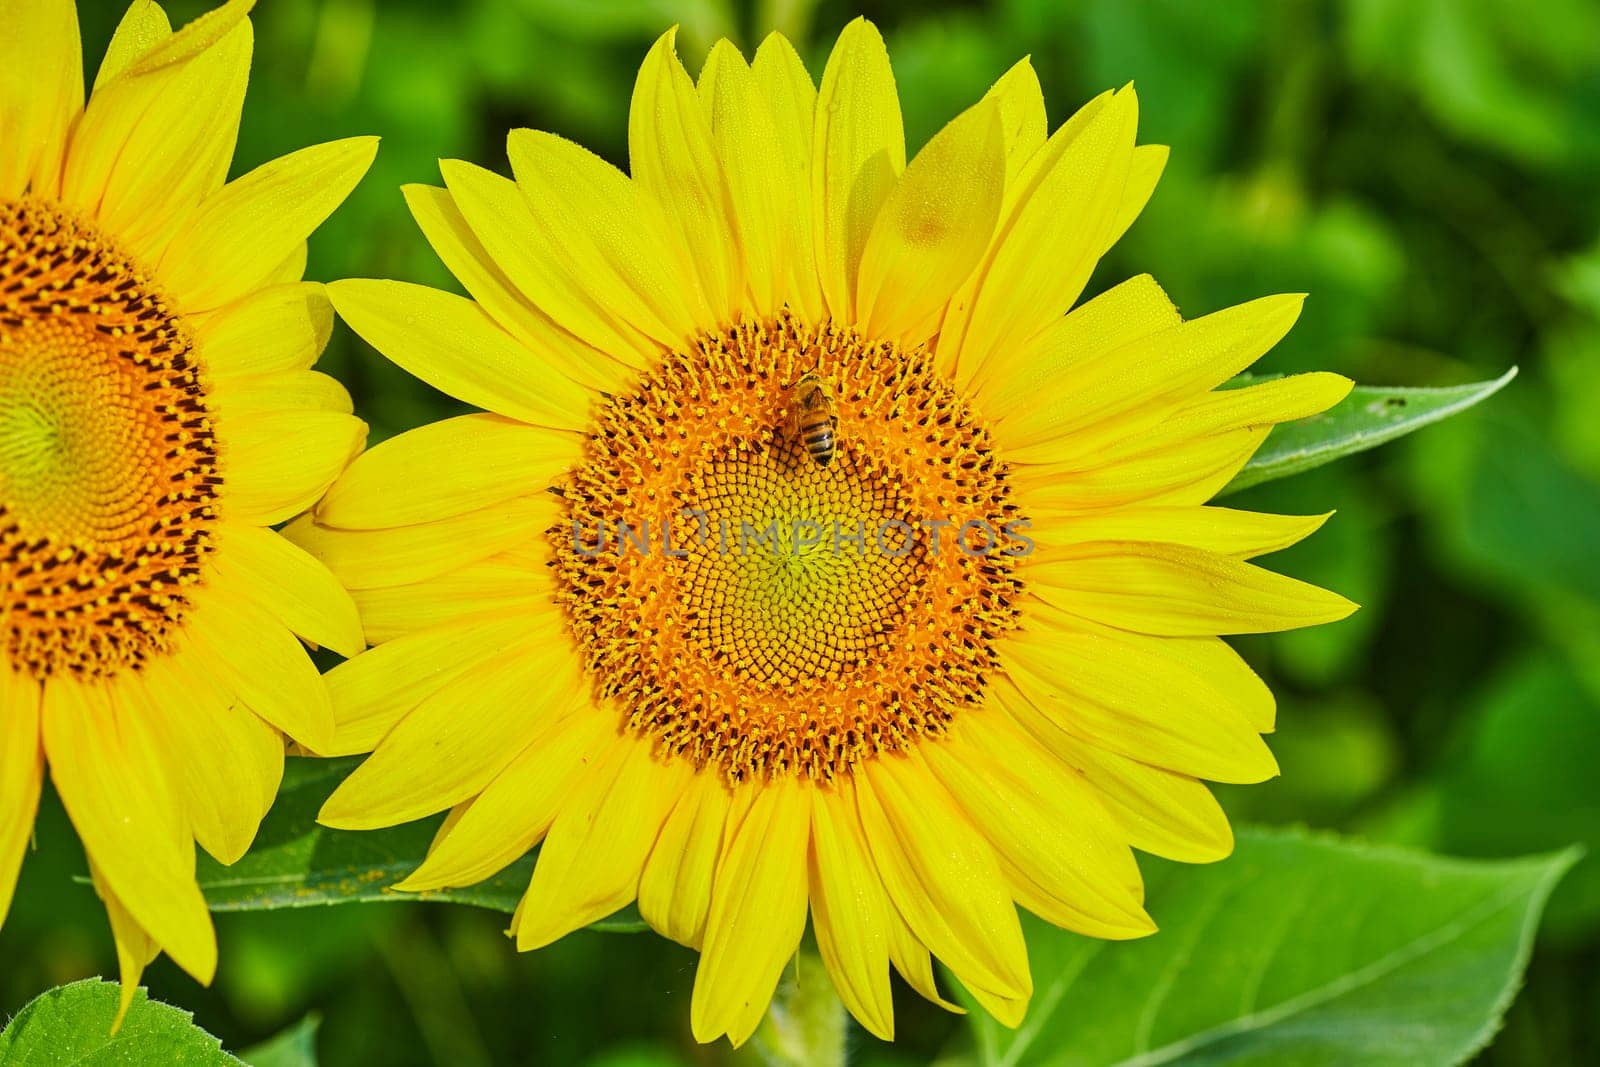 Image of Close up of bee pollinating center of large yellow sunflower